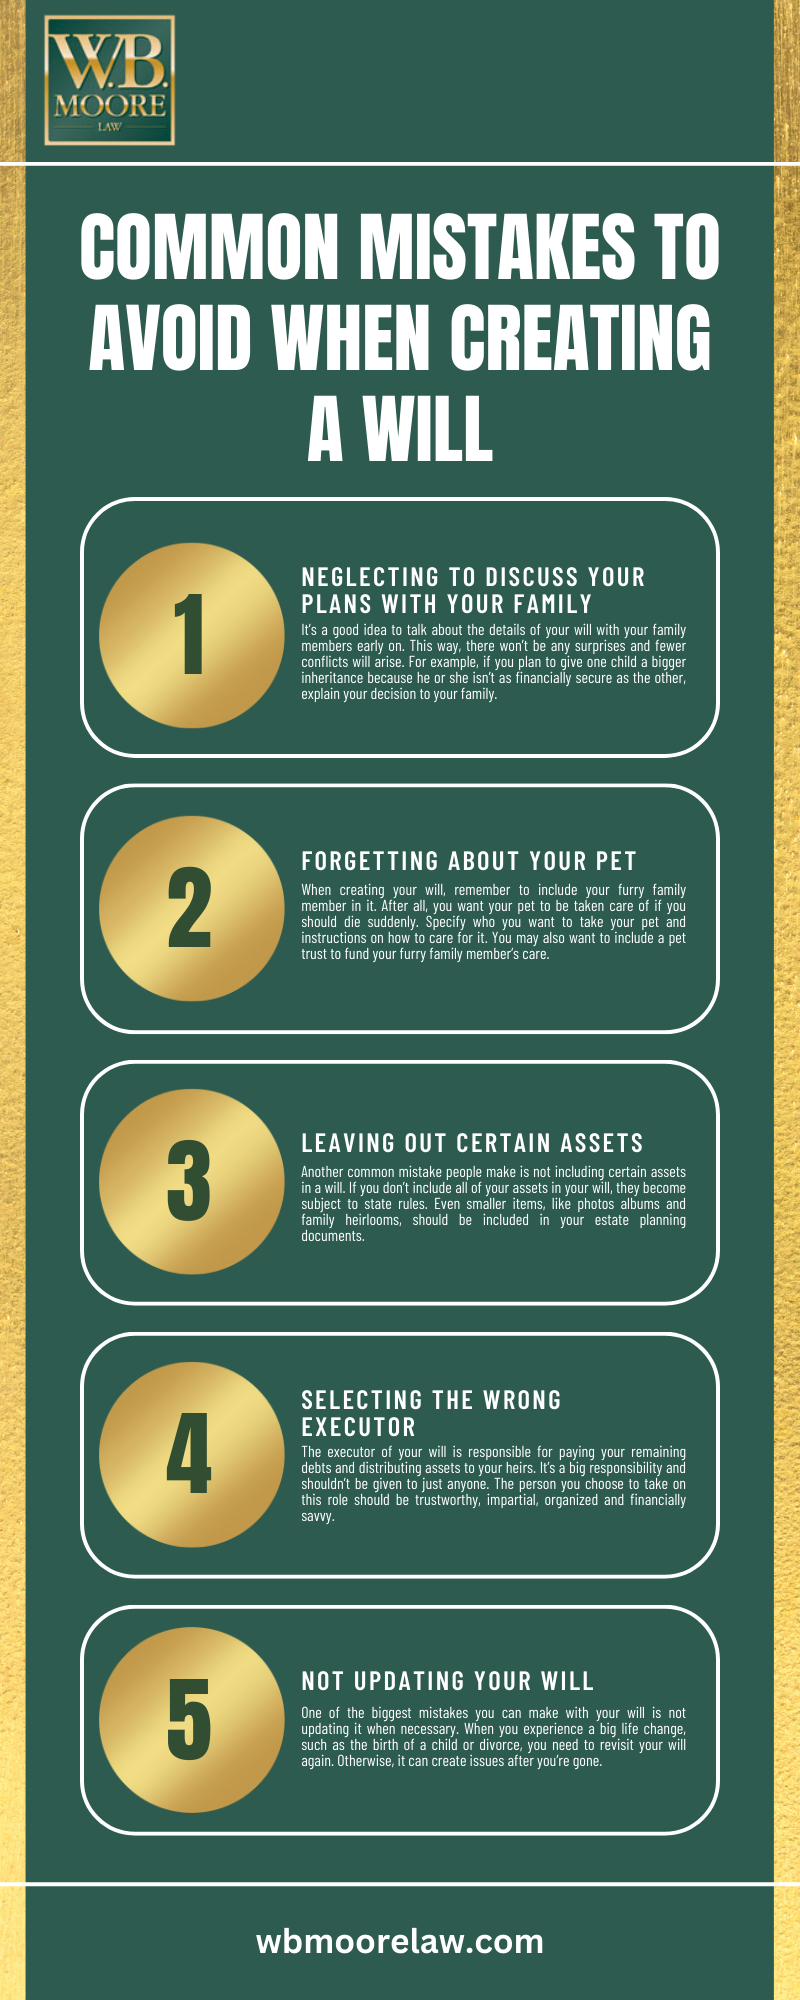 COMMON MISTAKES TO AVOID WHEN CREATING A WILL INFOGRAPHIC